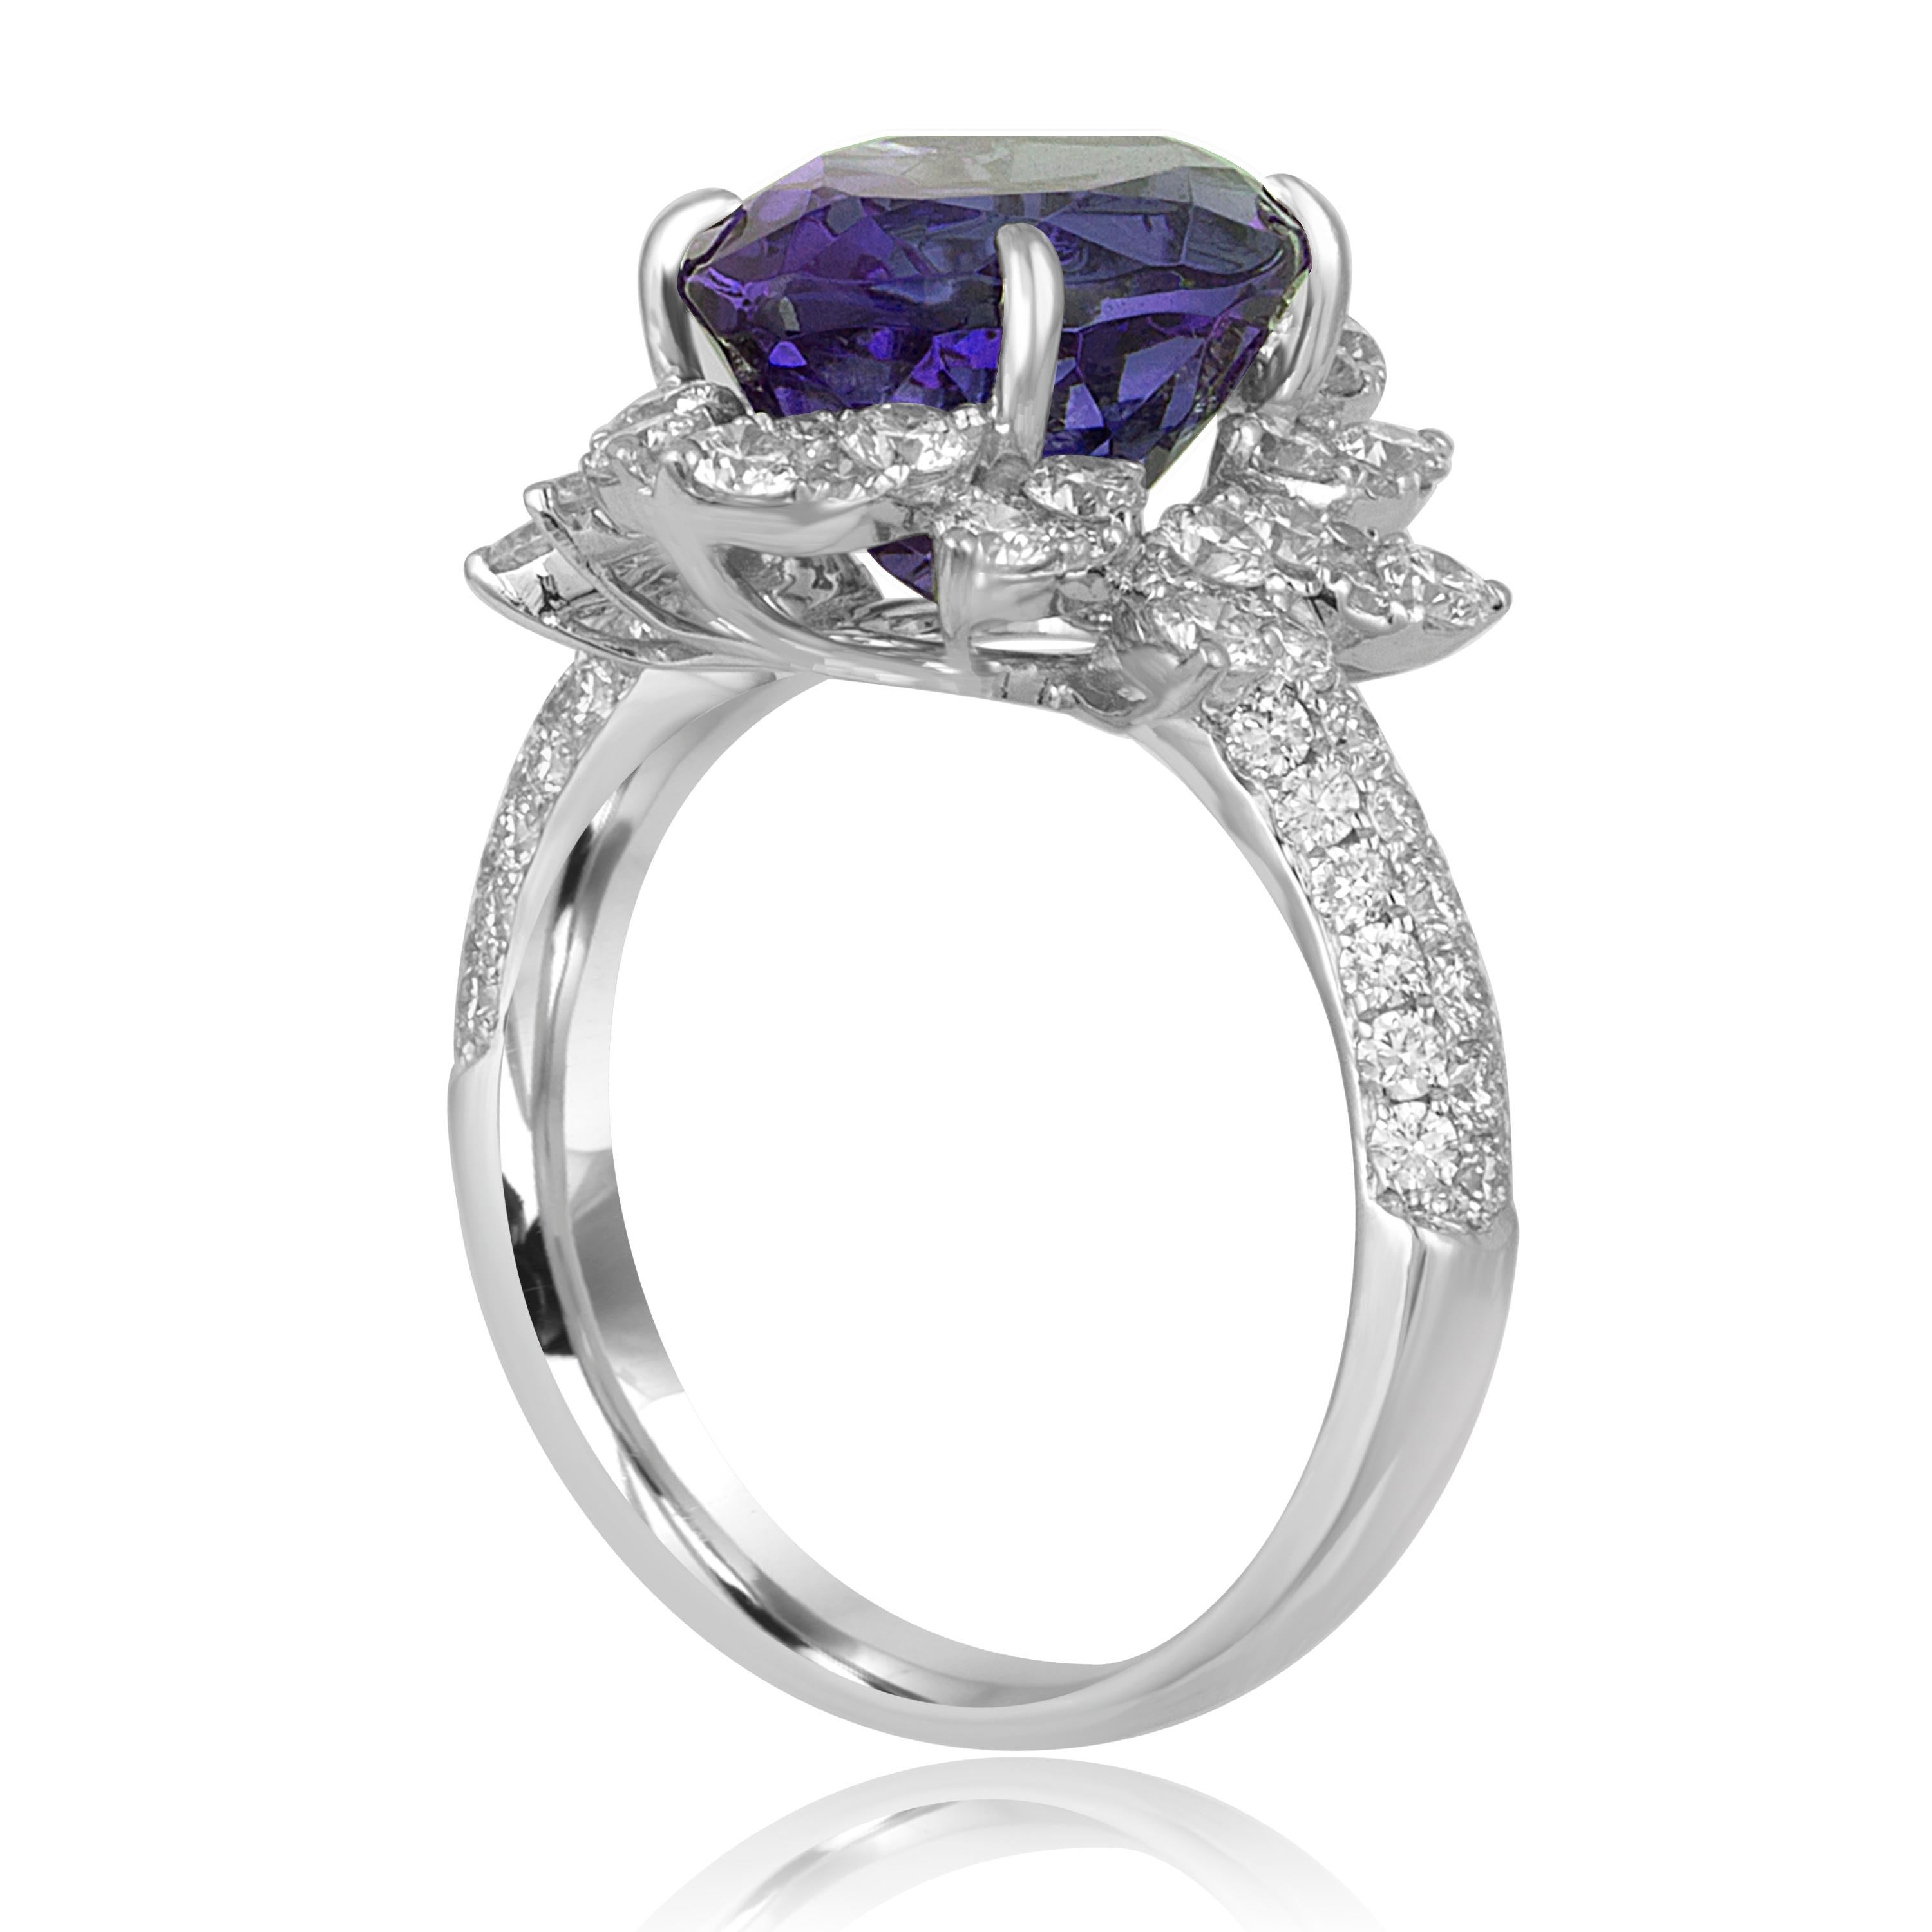 Huge & Stunning
The ring is 18K White Gold
There are 1.52 Carats in Diamonds F/G VS
The Tanzanite is 6.48 Carats Marquise Shape
The top portion measures 0.75